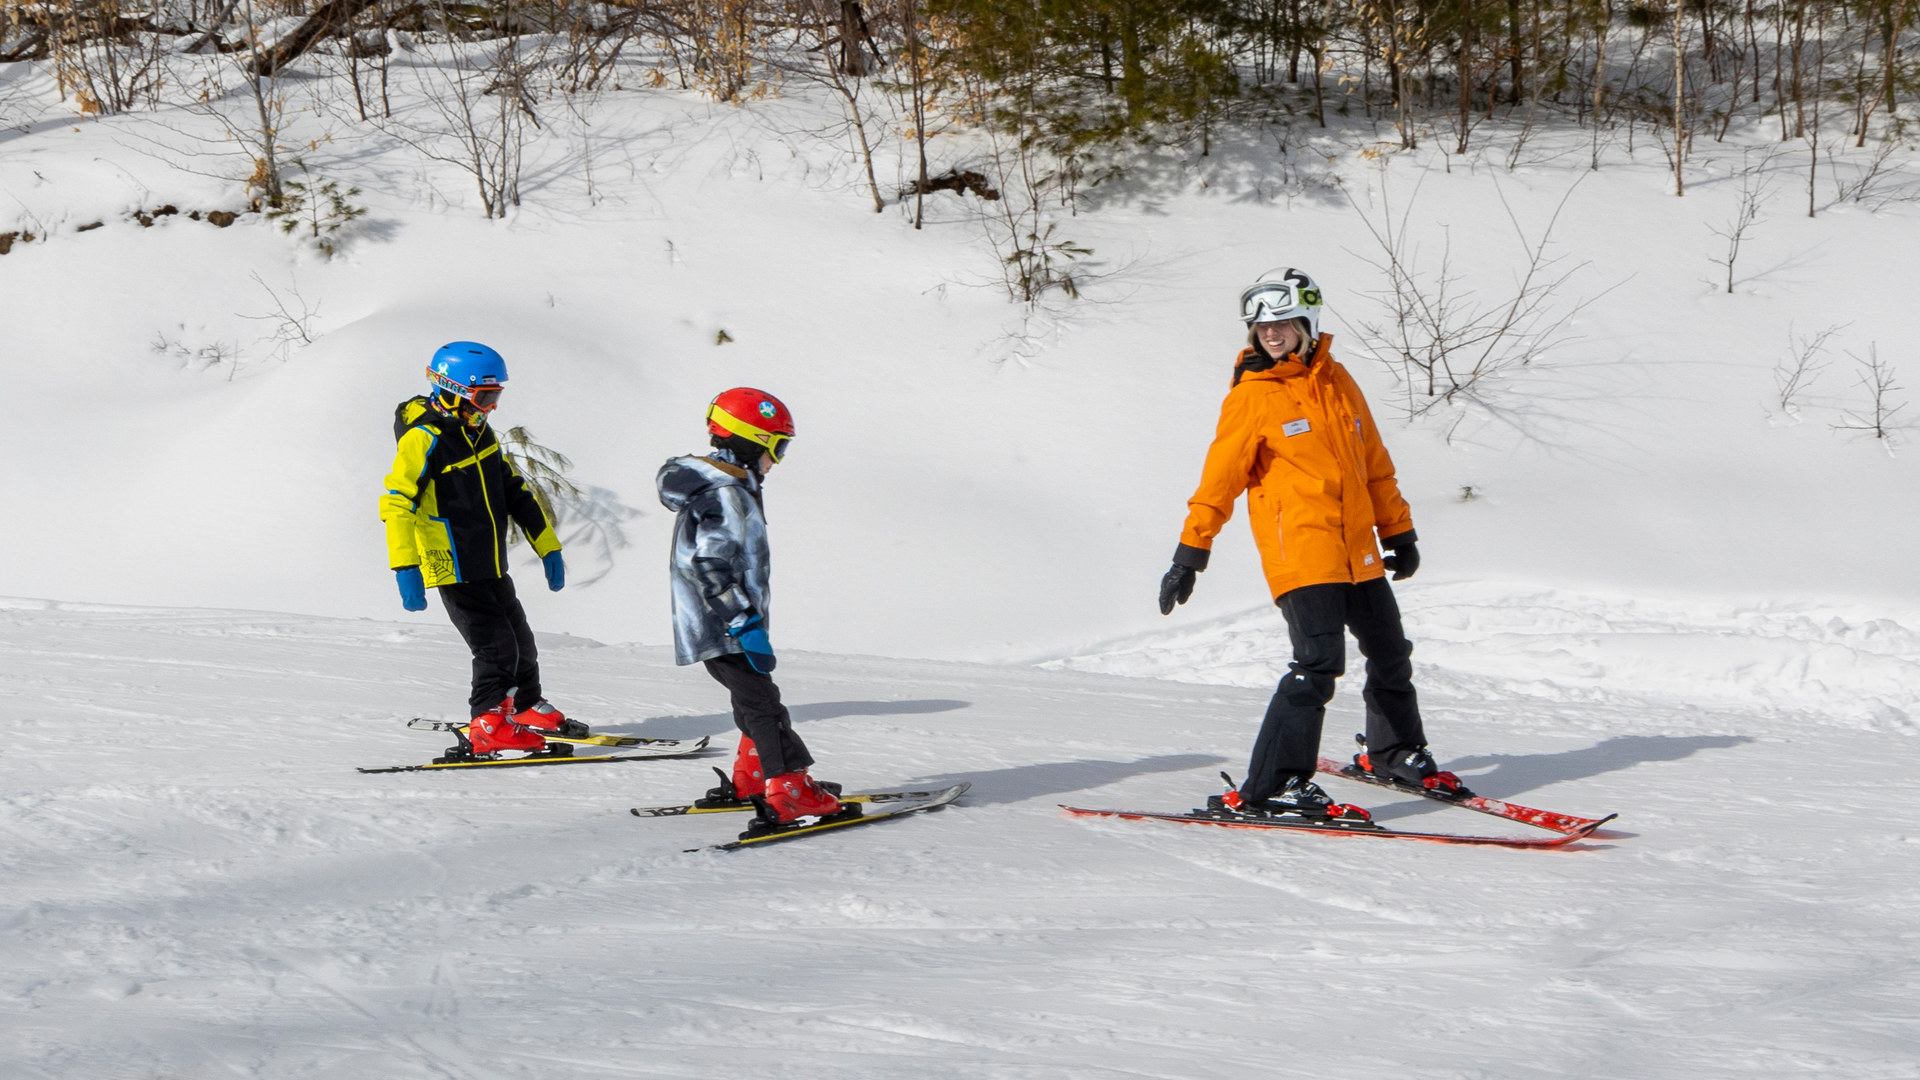 Ski instructor with students on snow